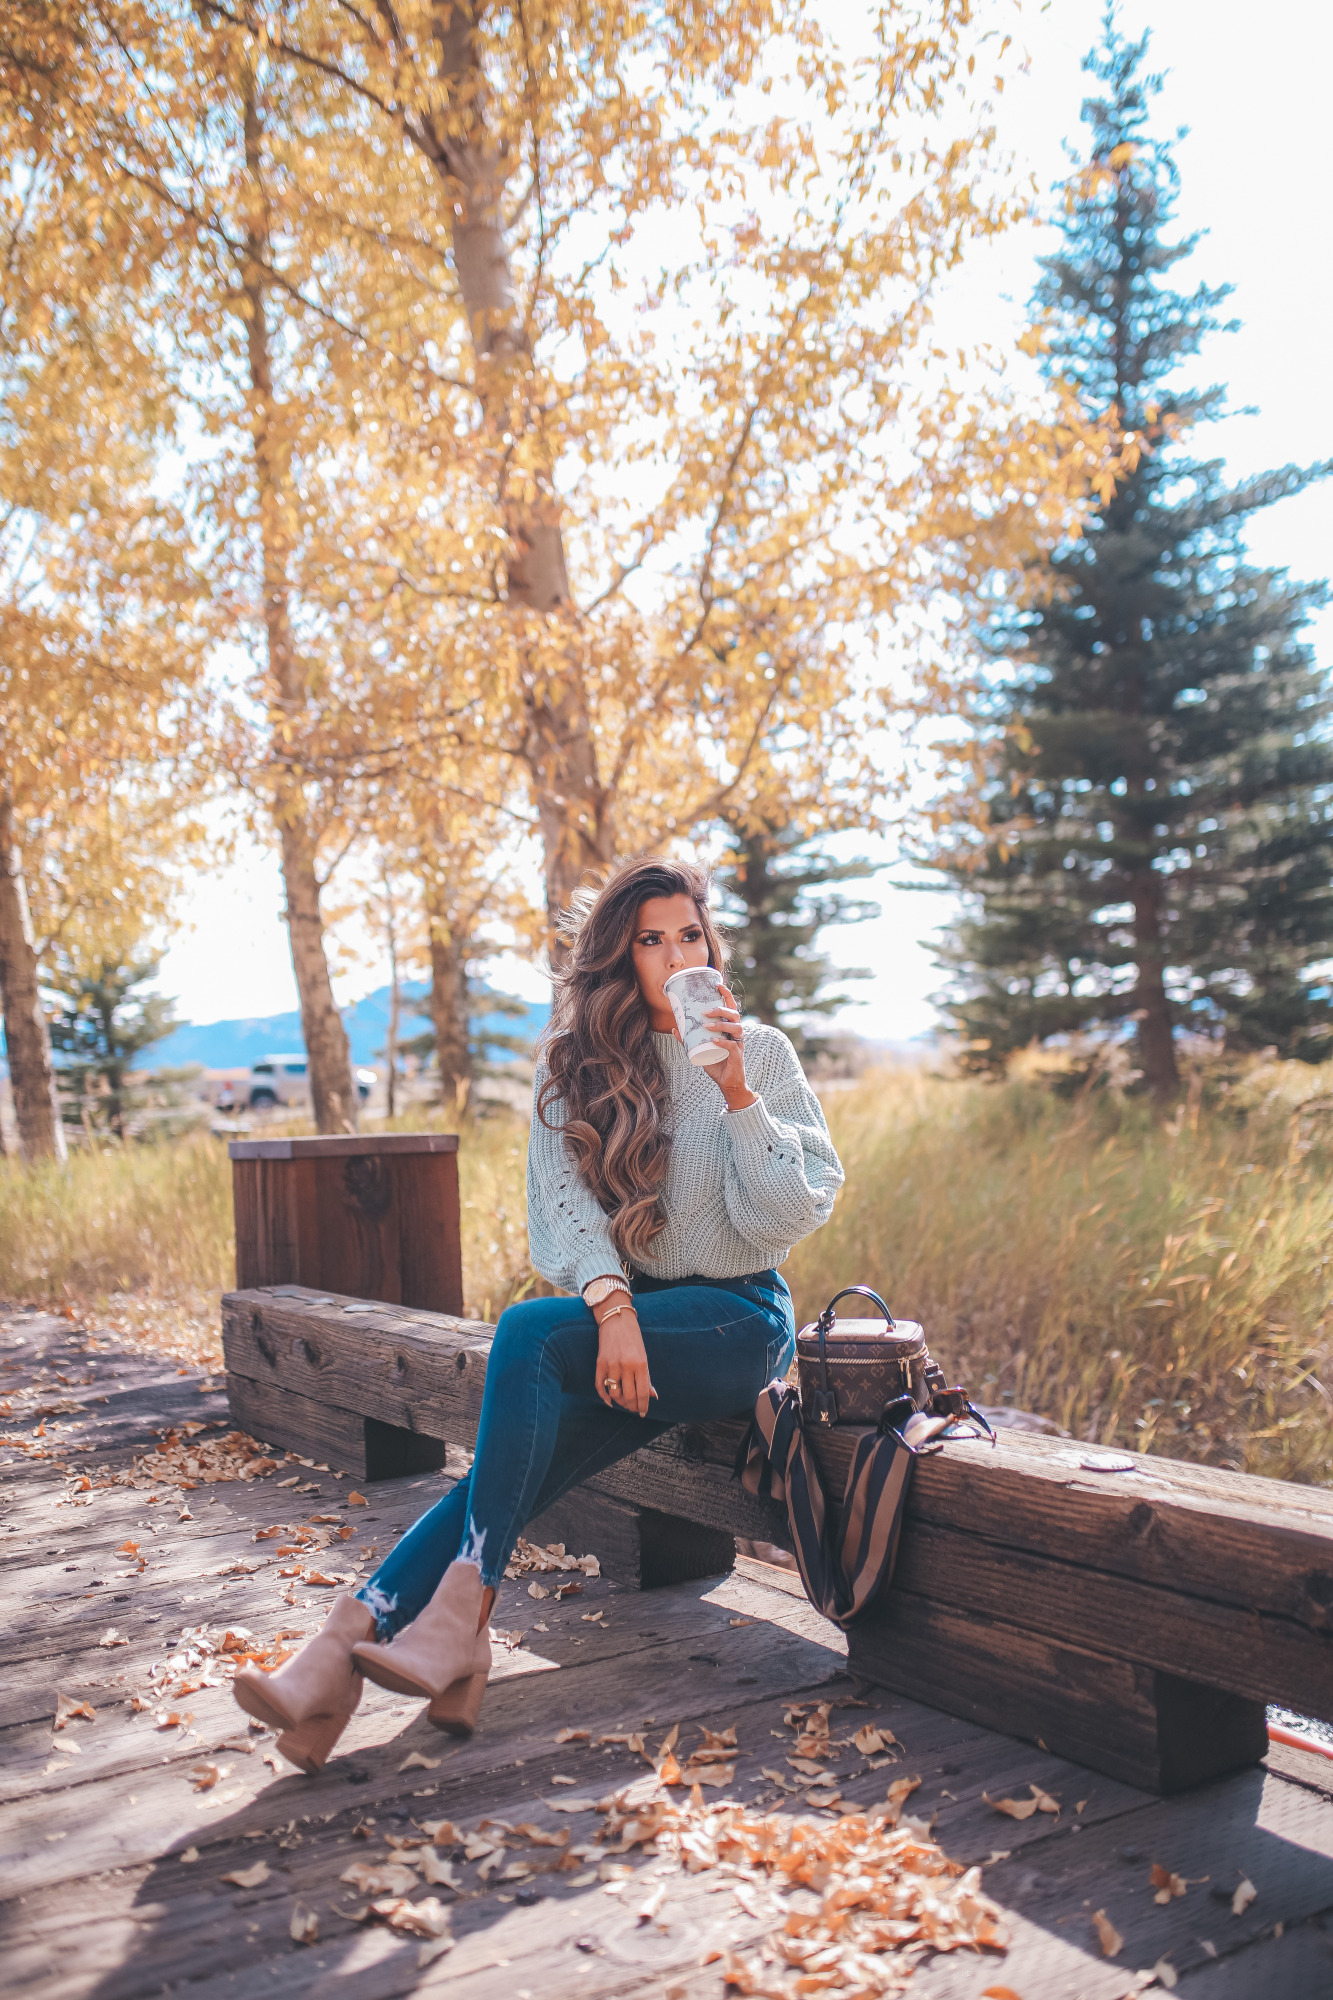 Fall Clothing by popular US fashion blog, The Sweetest Thing: image of Emily Gemma outside at Jackson Hole and wearing a Nordstrom BP.Traveling Stitch Sweater, Nordstrom Good American Good Waist Distressed High Waist Ankle Skinny Jeans, Nordstrom Steve Madden Kaylah Pointed Toe Bootie, and sitting next to a pair of Nordstrom Celine 54mm Cat Eye Sunglasses.